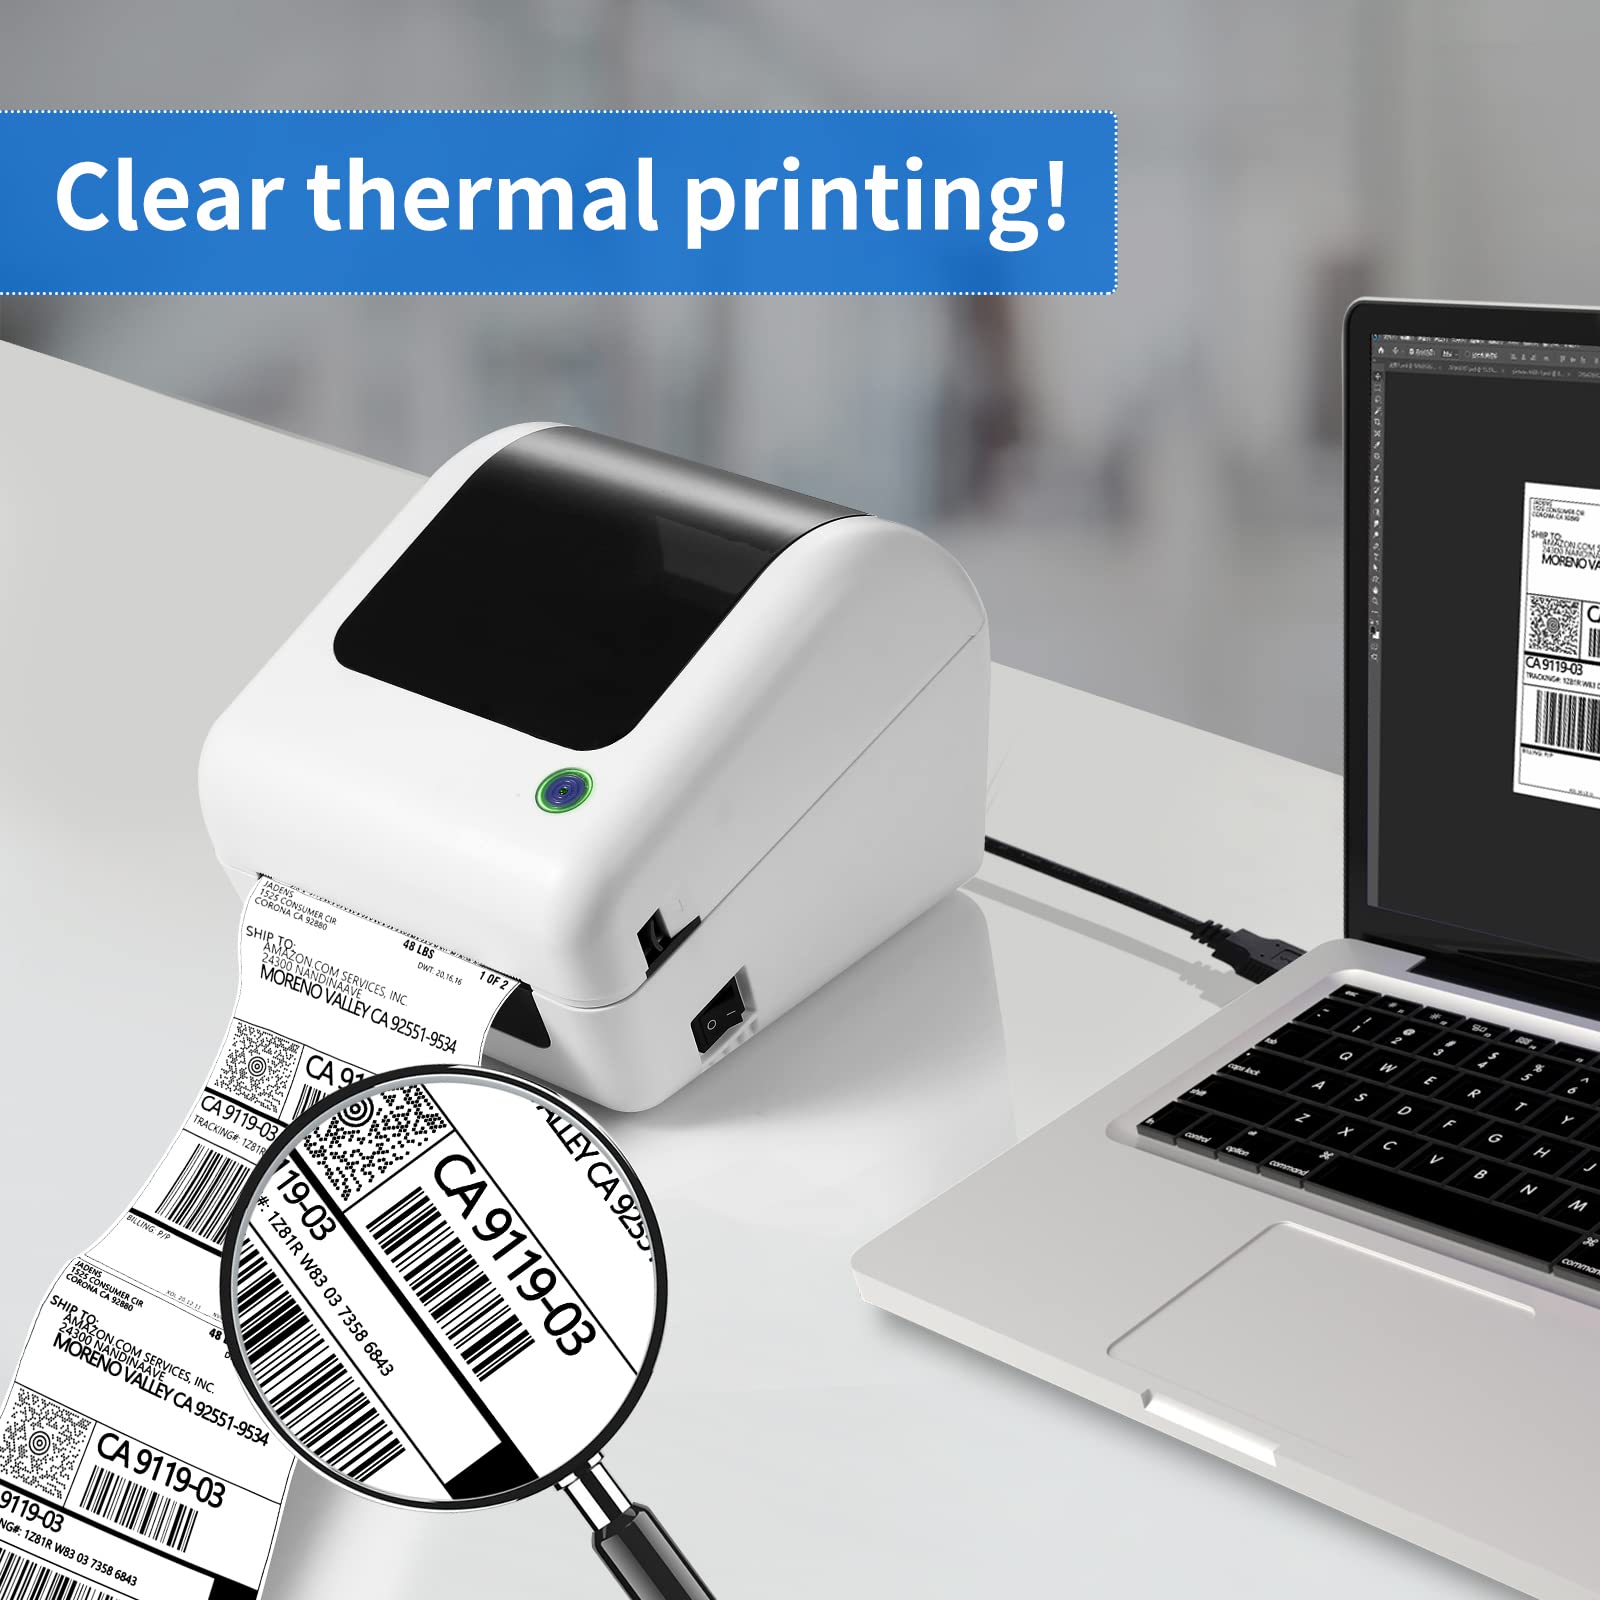 Bluetooth Thermal Shipping Label Printer - Wireless 4x6 Label Maker for packages, Compatible with iPhone and PC, Phone, USB for MAC, Works with Ebay, Amazon, Shopify, Etsy, UPS, USPS Barcode, Upgrade